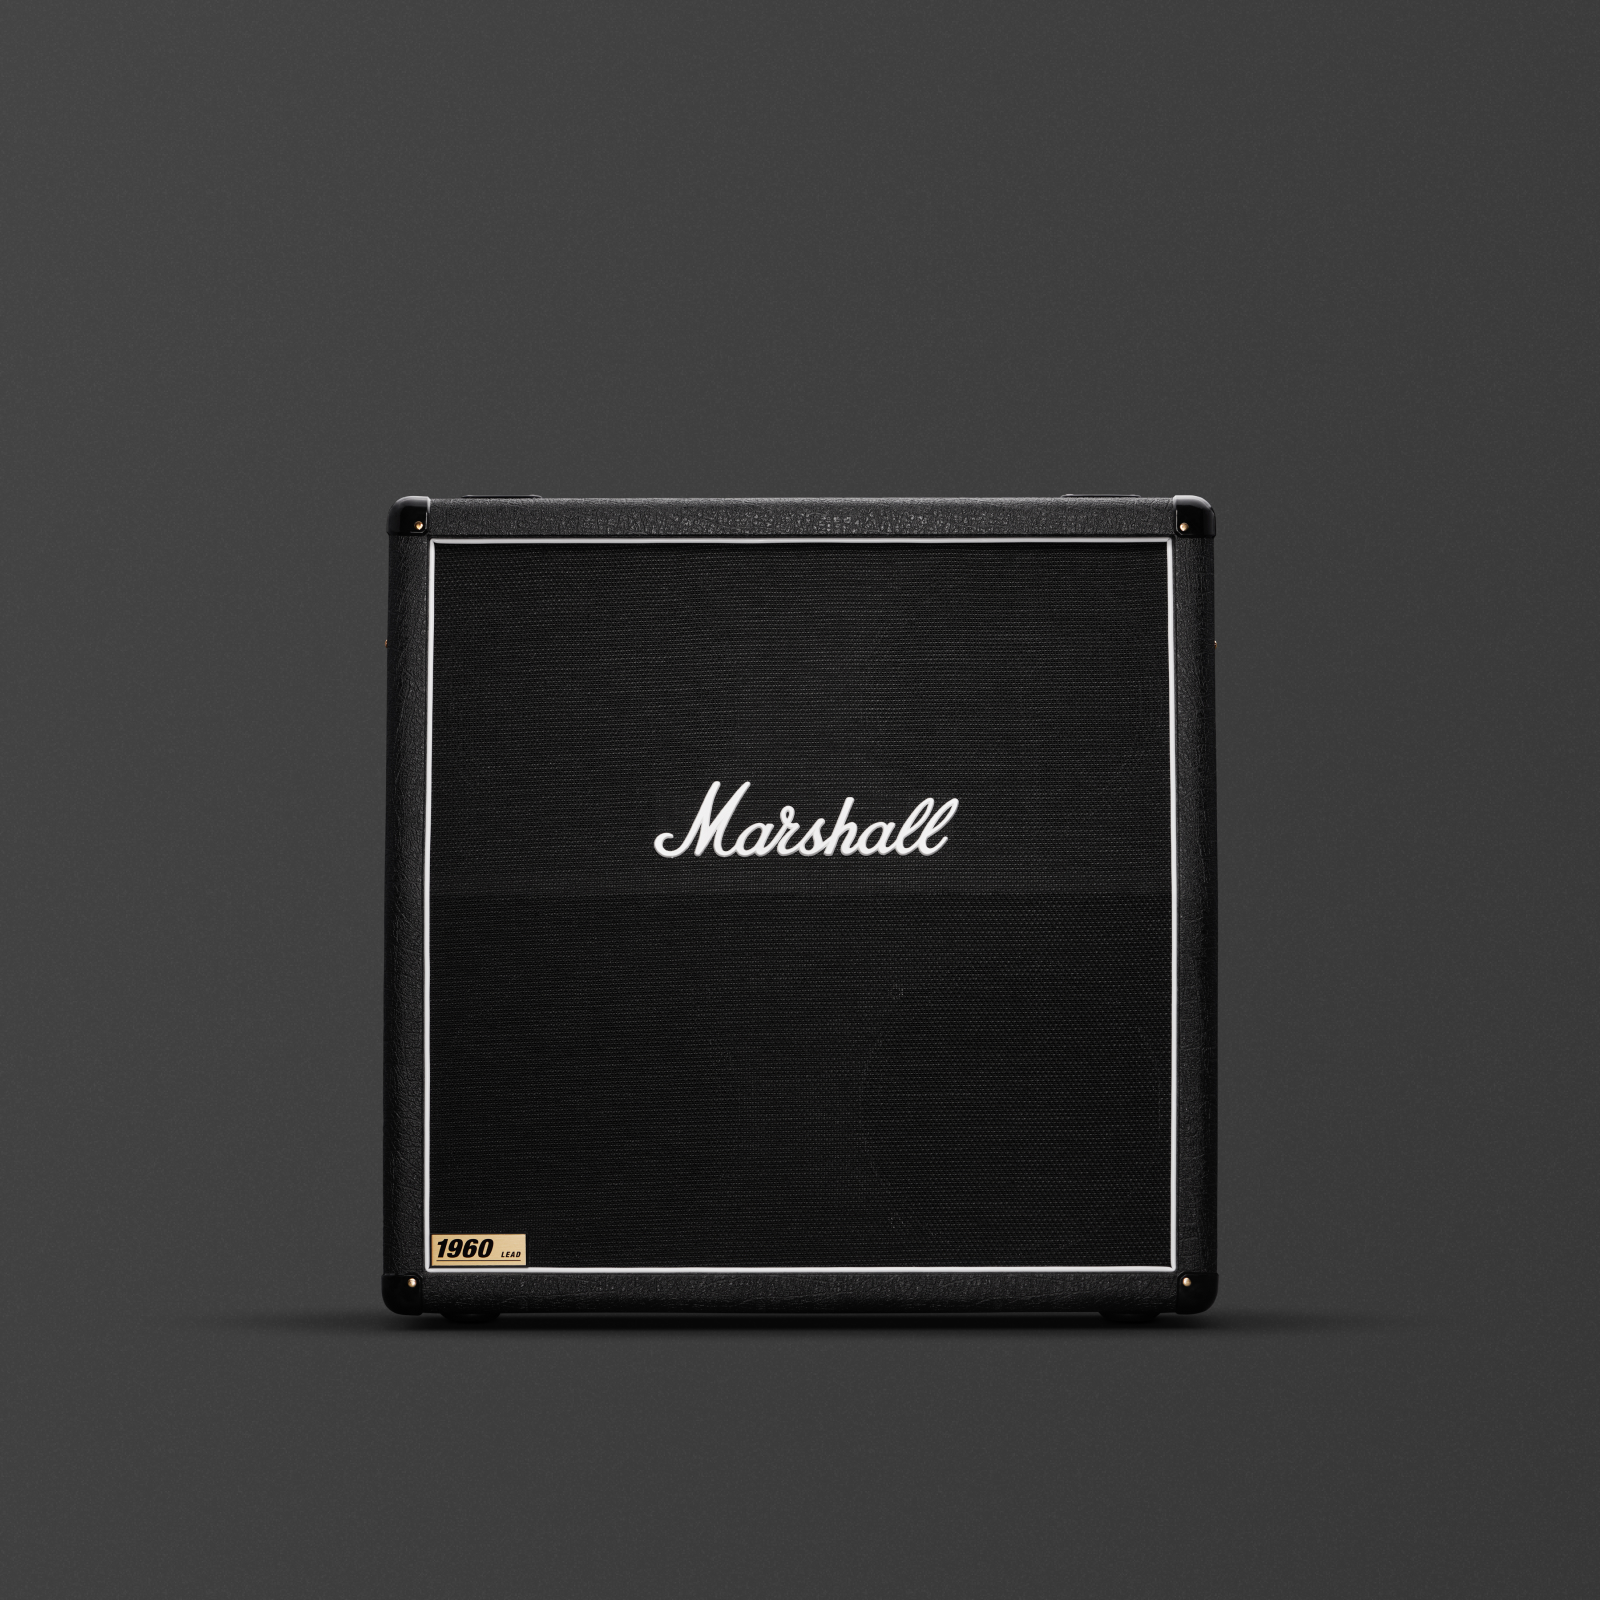 Marshall's 1960A. black cabinet.  